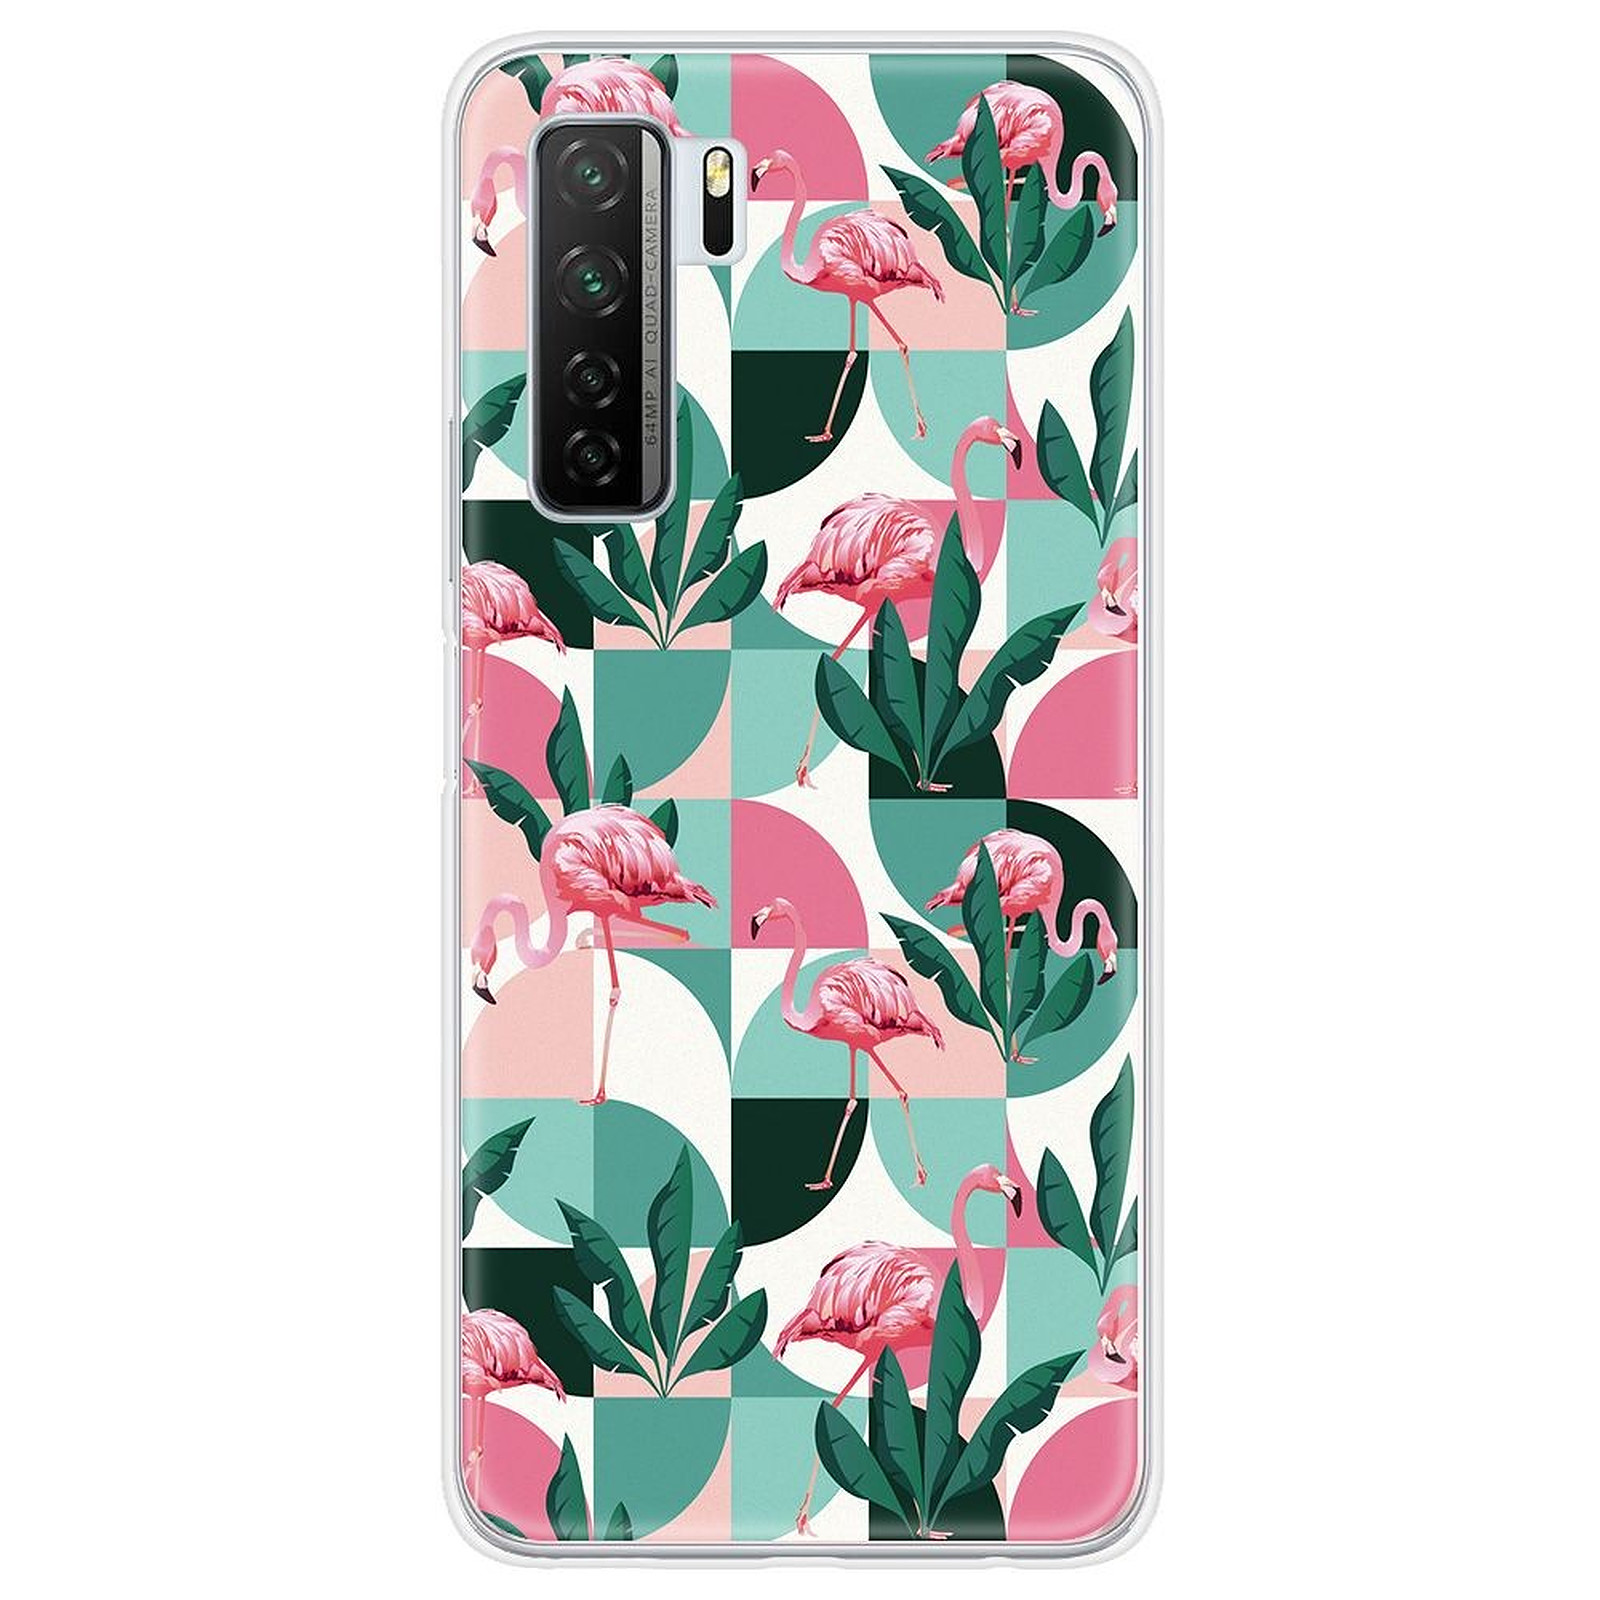 1001 Coques Coque silicone gel Huawei P40 Lite 5G motif Flamants Roses ge´ome´trique - Coque telephone 1001Coques